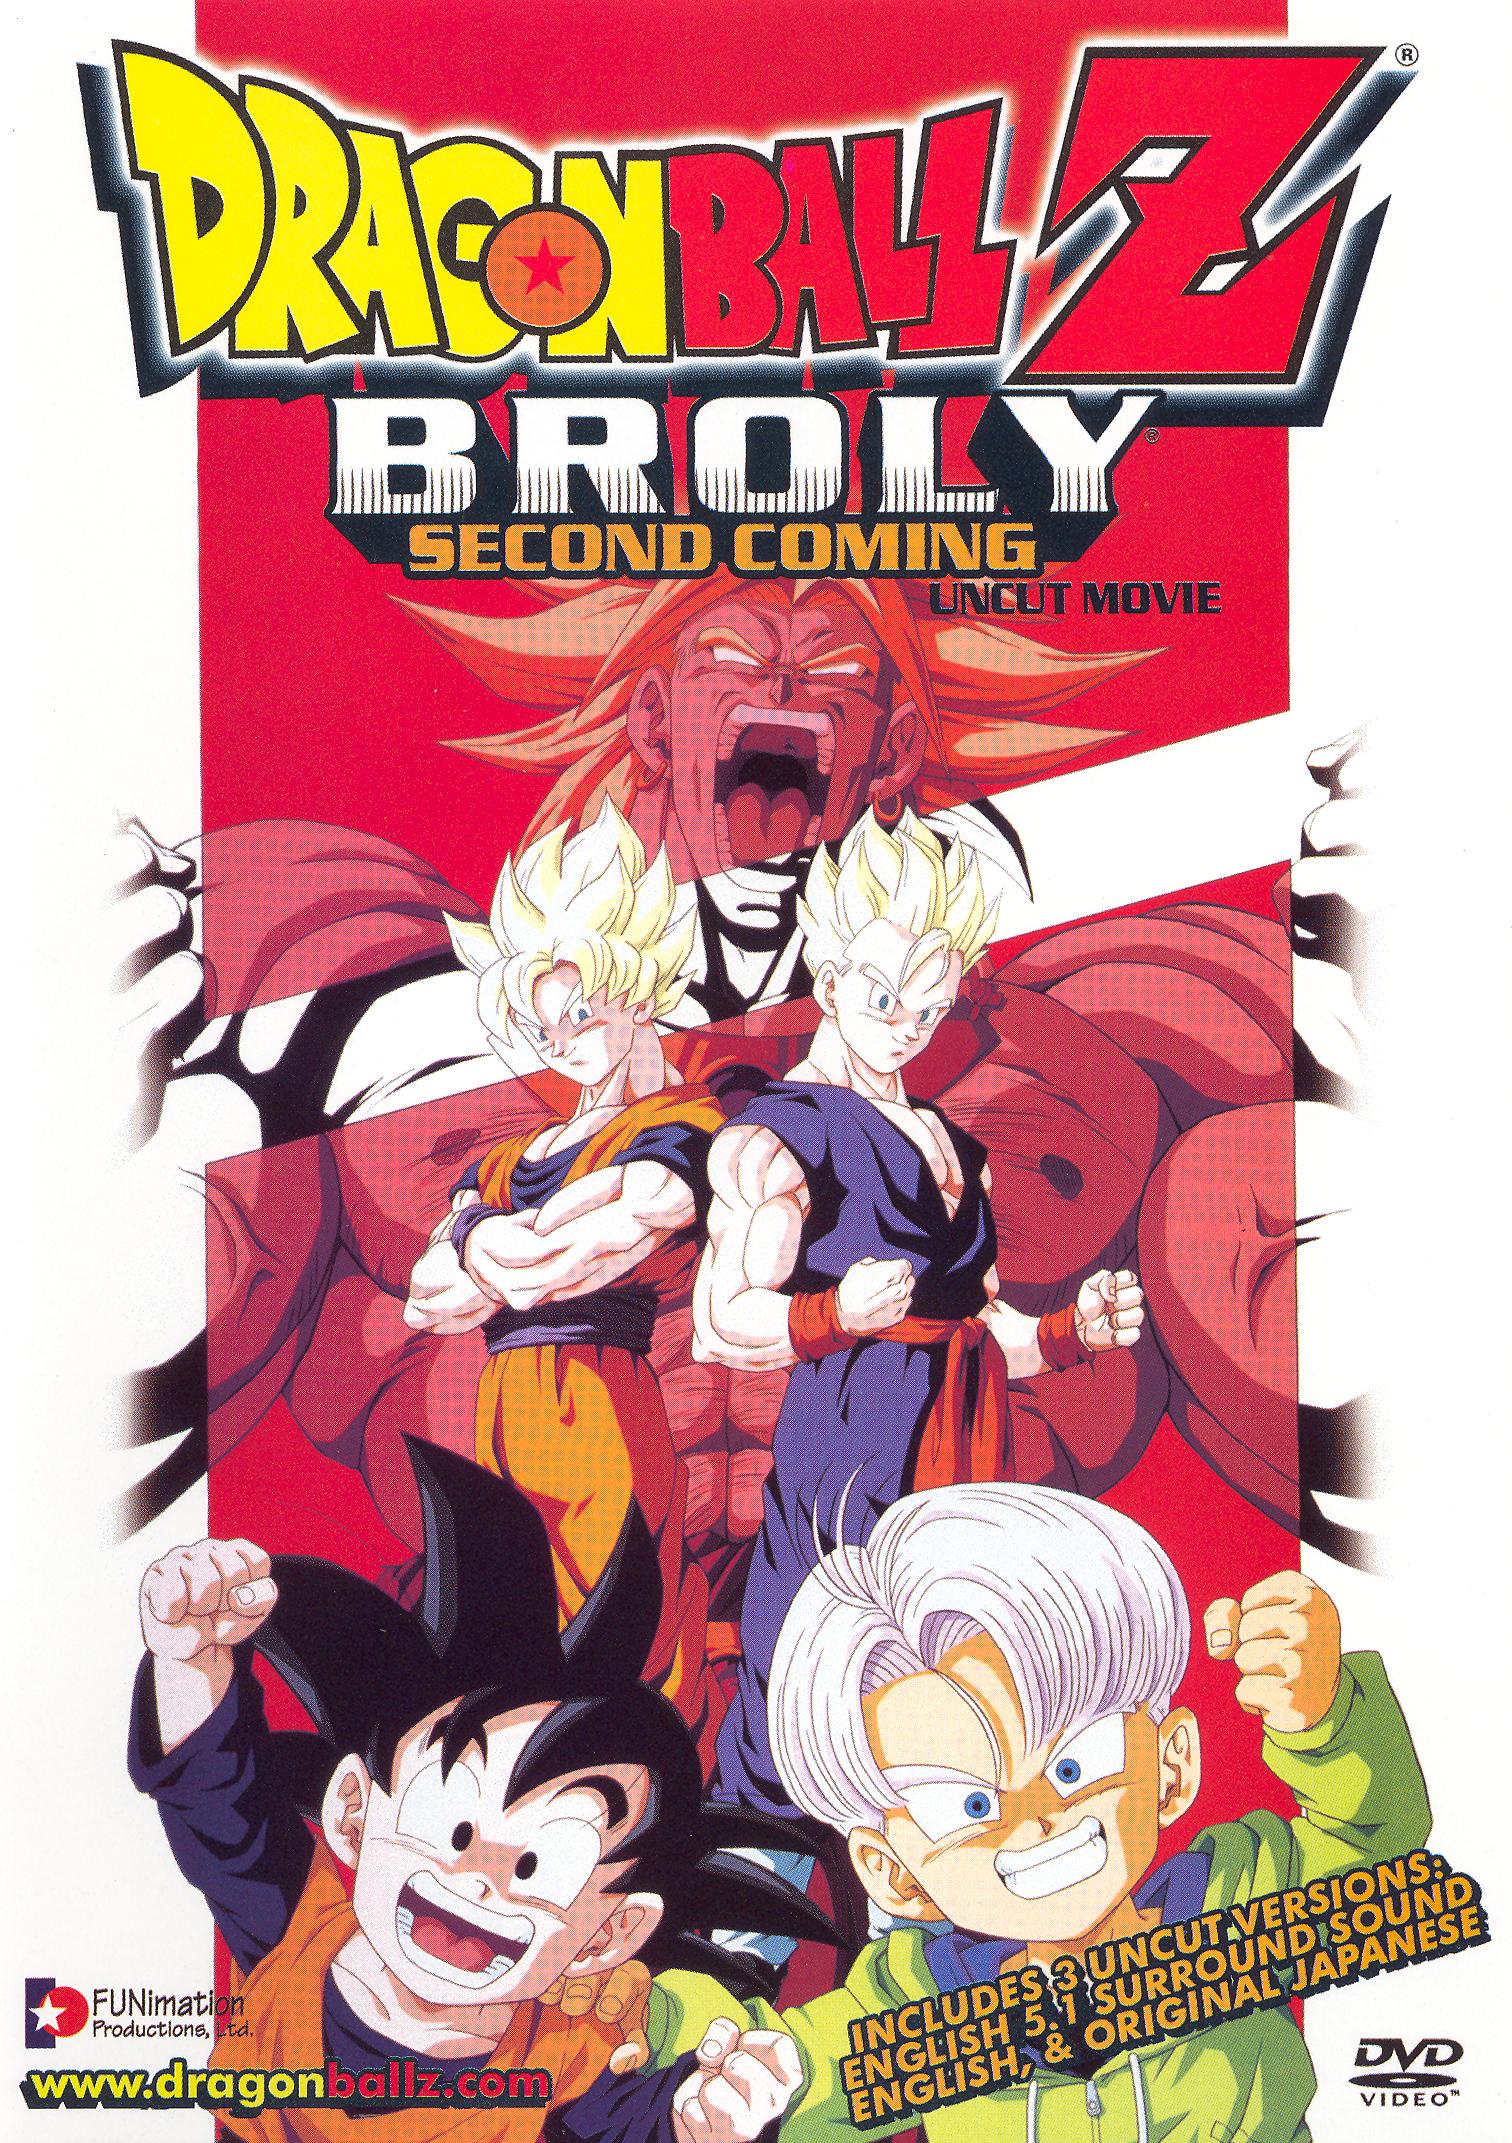 Corona Jumper: Dragonball Z Movie 10: Broly Second Coming